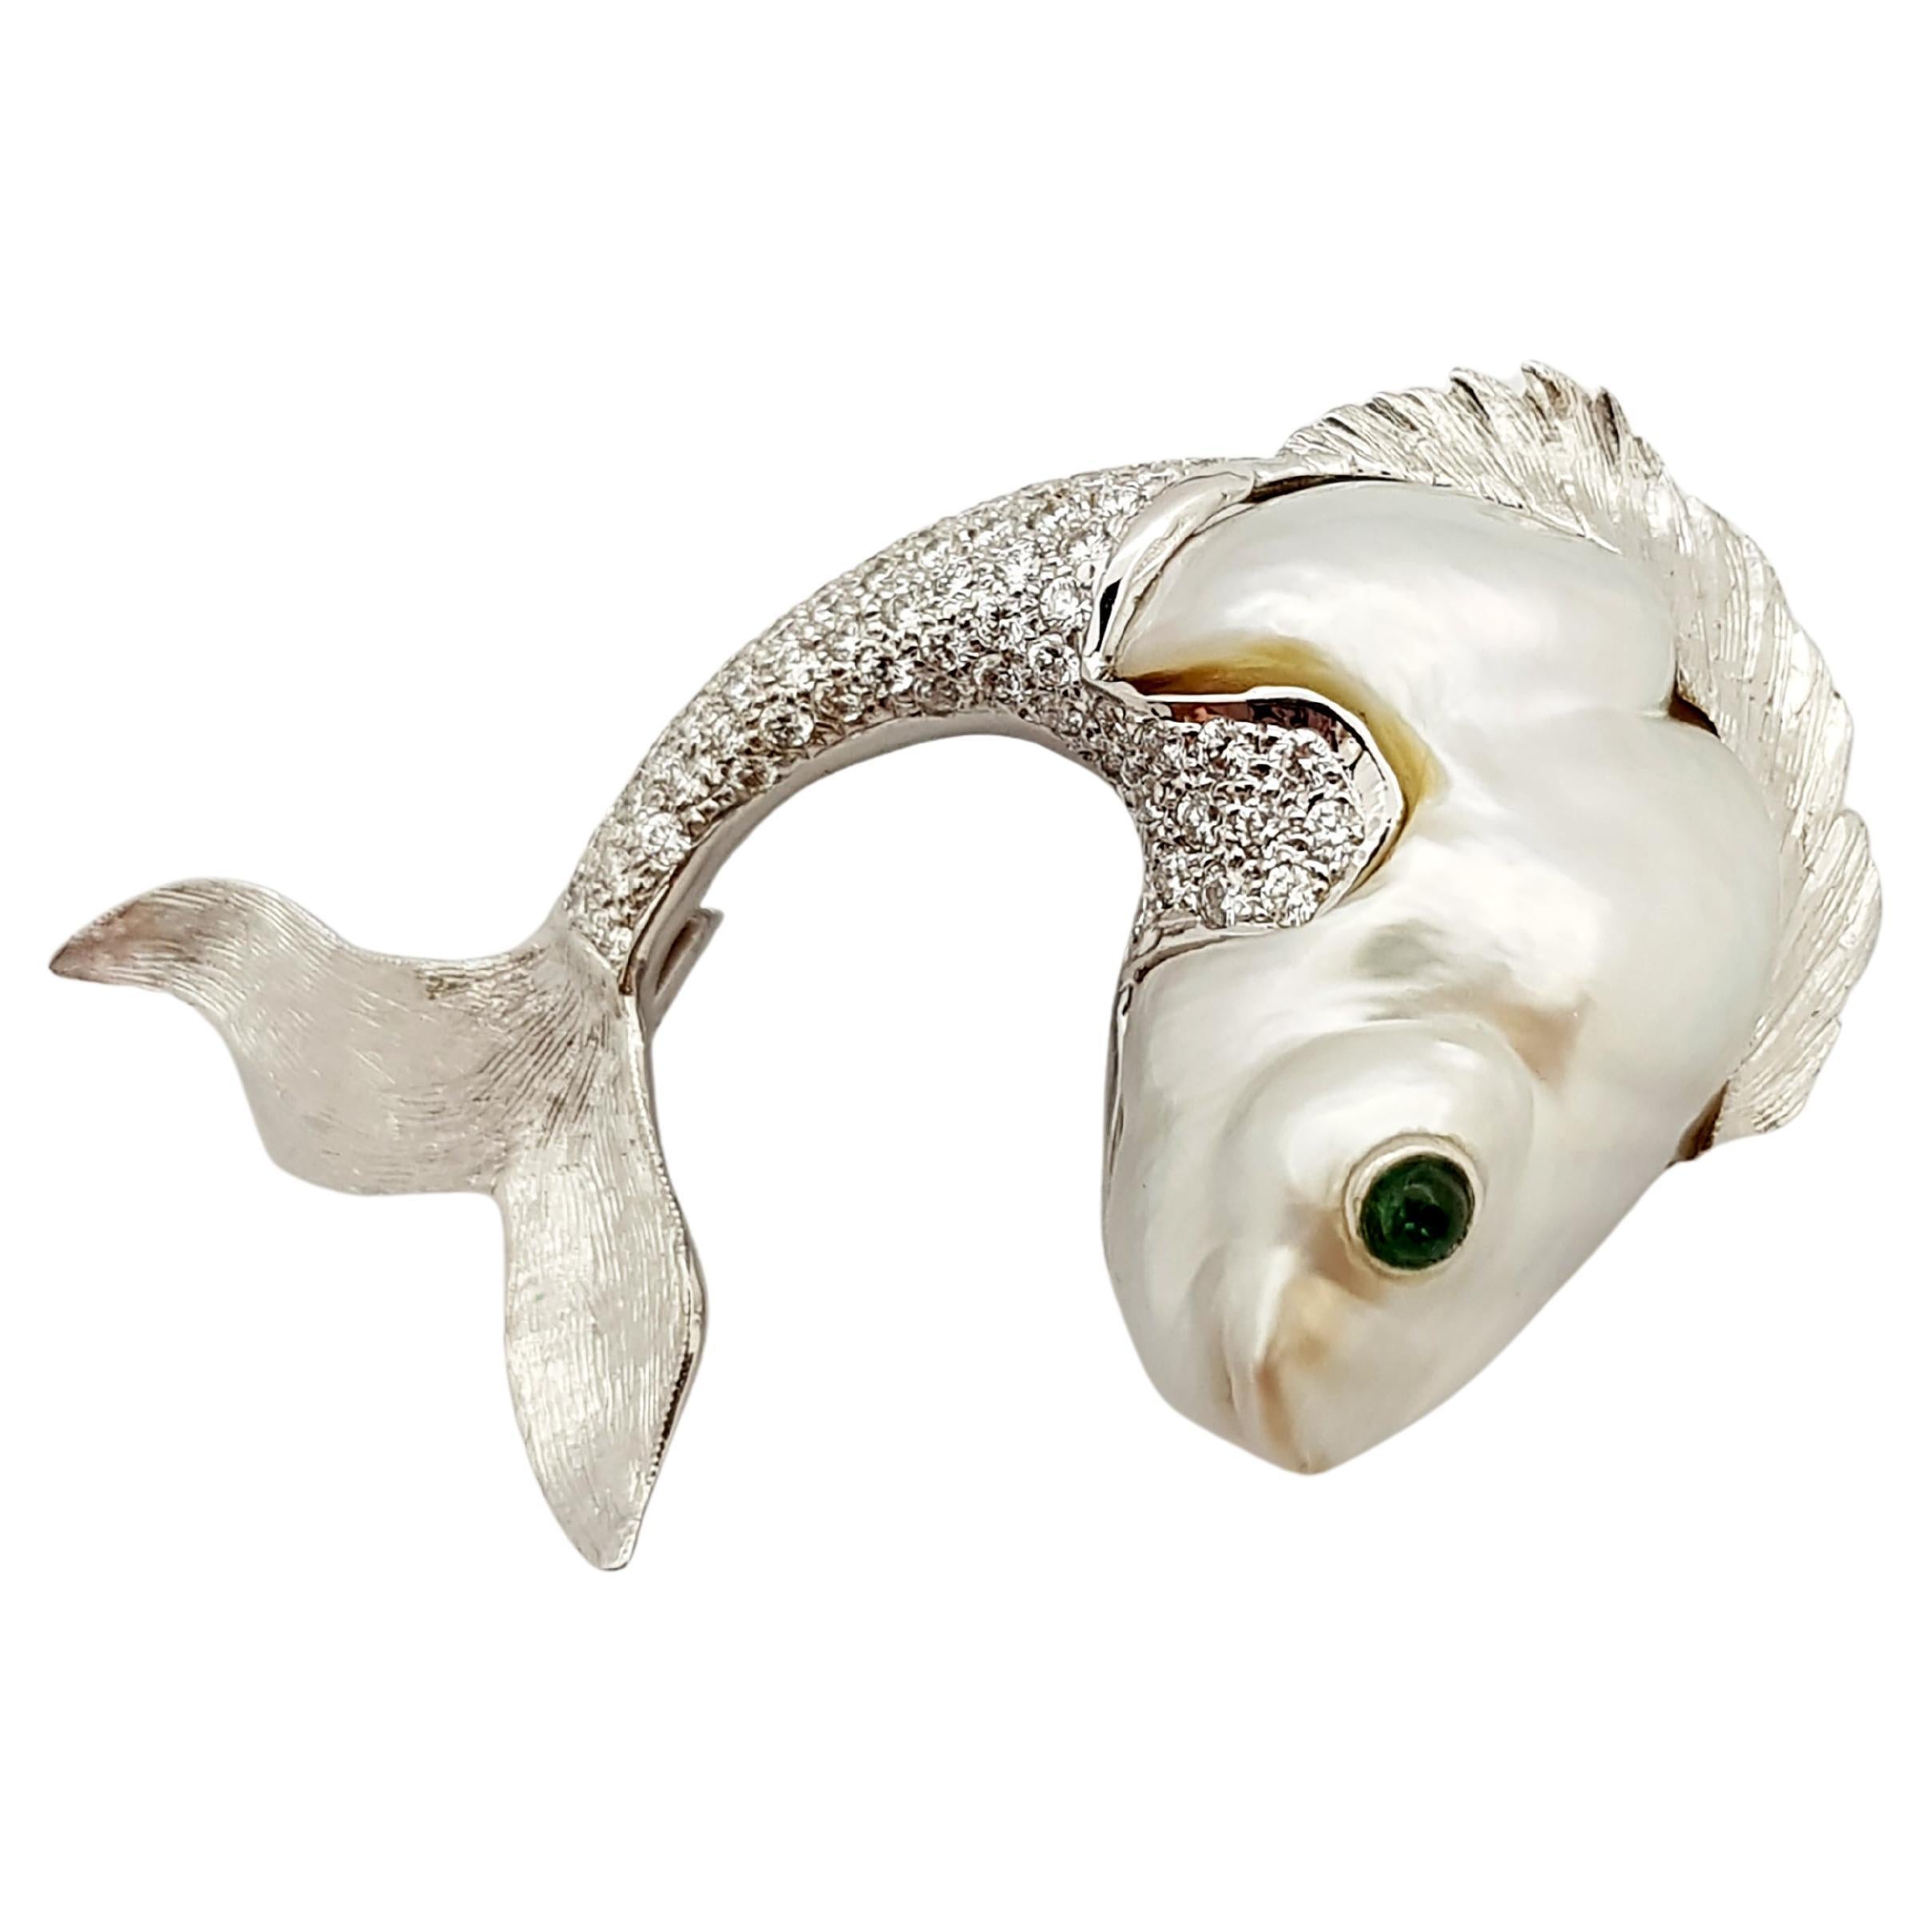 South Sea Pearl, Diamond and Emerald Fish Brooch Set in 18k White Gold Settings